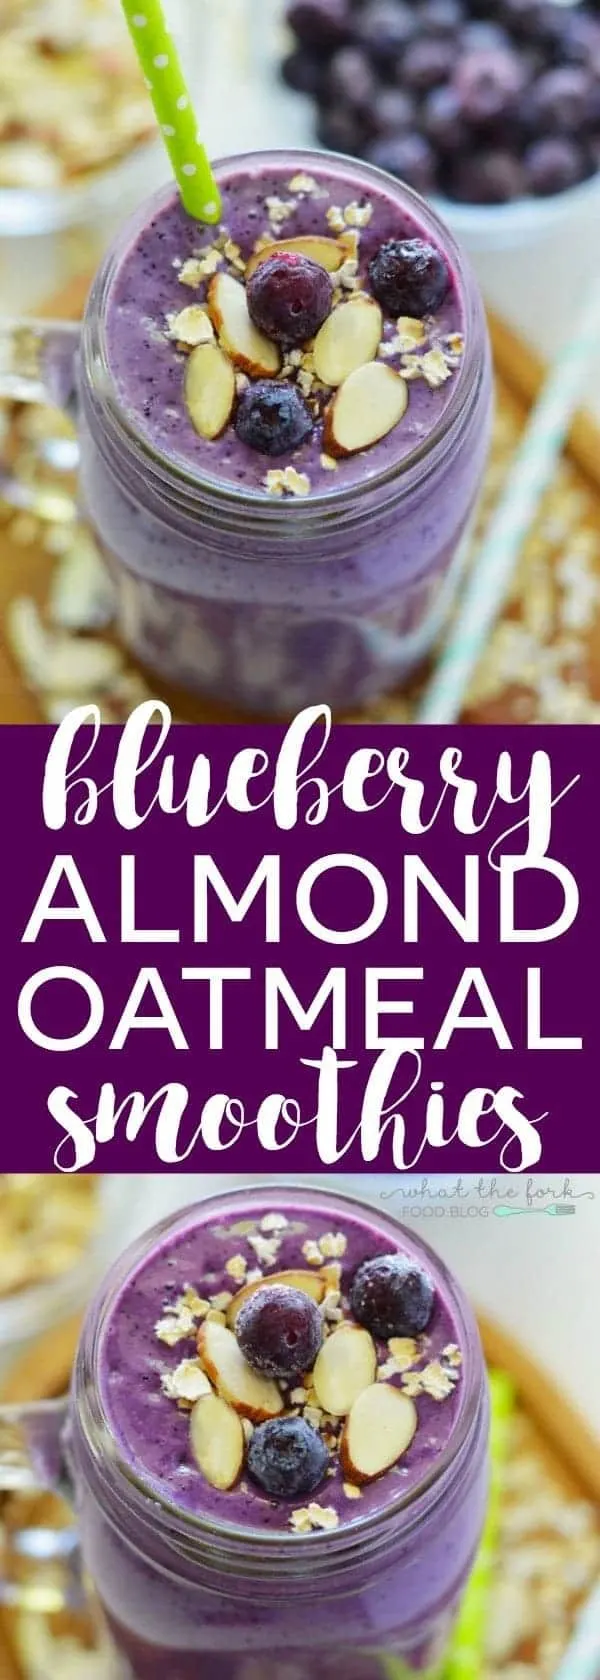 Blueberry Almond Oatmeal Smoothies (gluten free, dairy free, high protein) from What The Fork Food Blog | whattheforkfoodblog.com | Sponsored by Dream